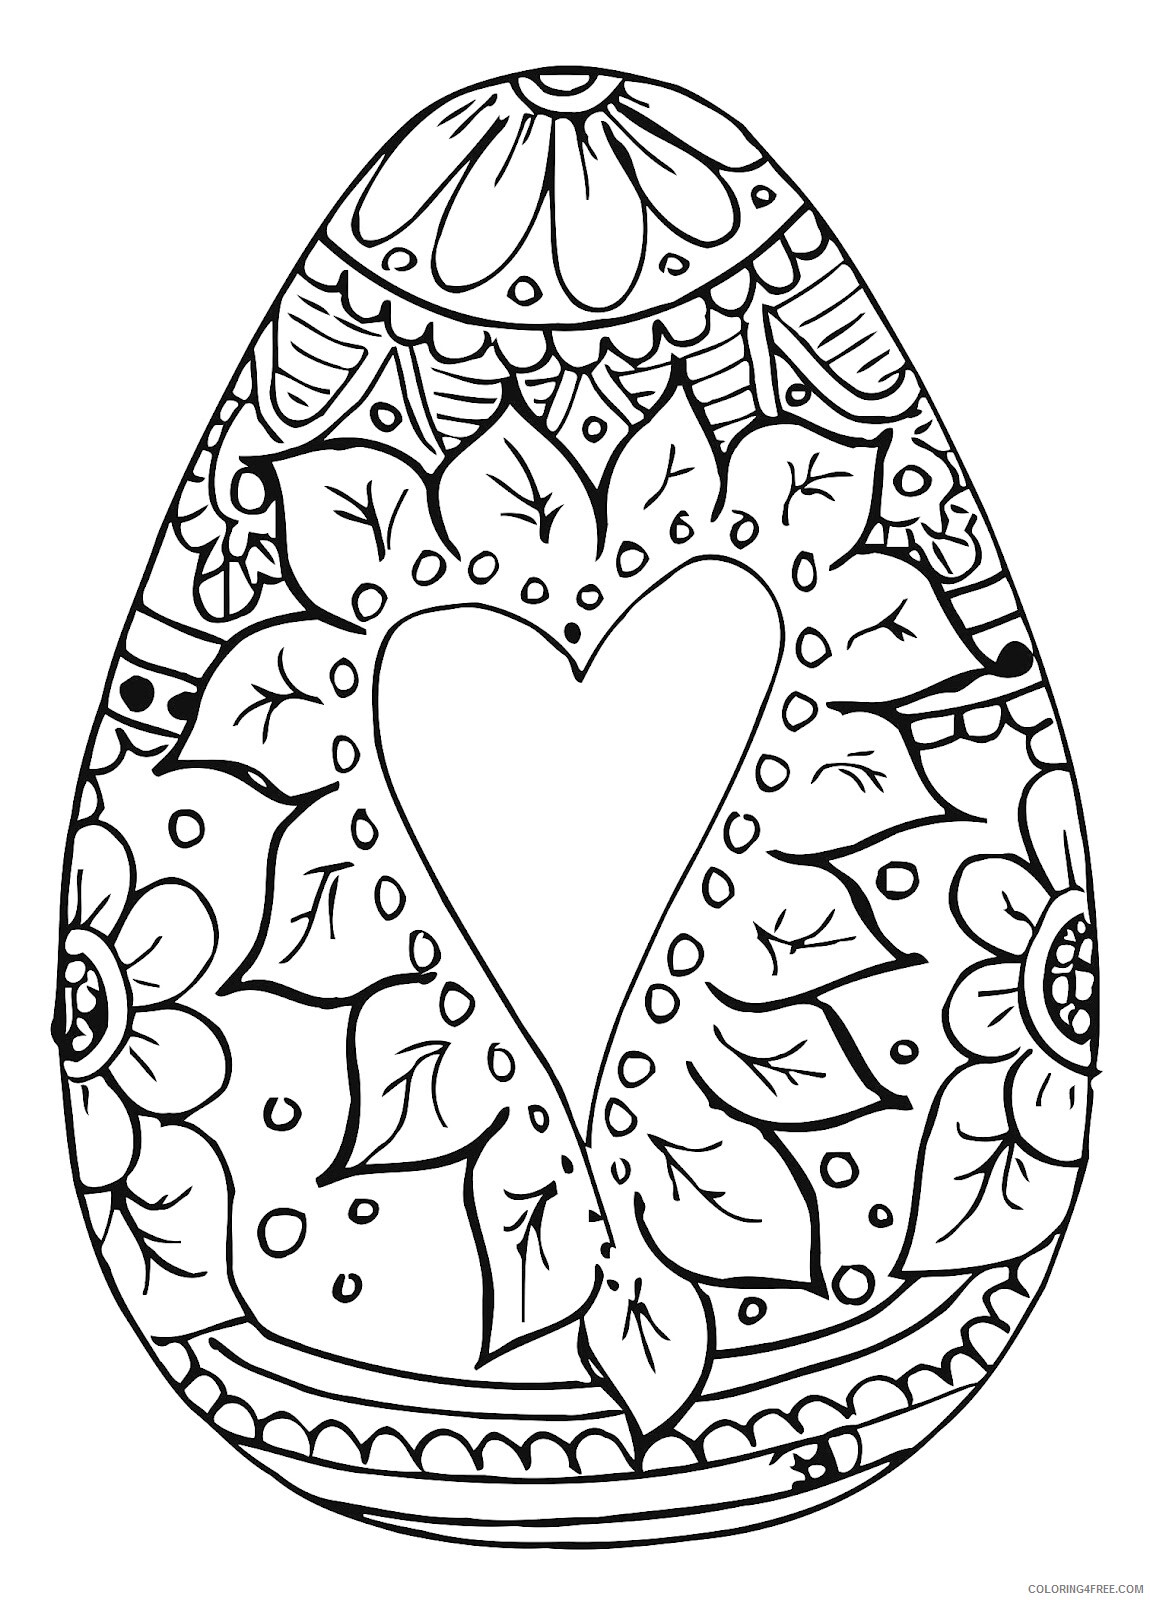 Zentangle Coloring Pages Easter Egg Design Printable 2020 041 Coloring4free Coloring4free Com